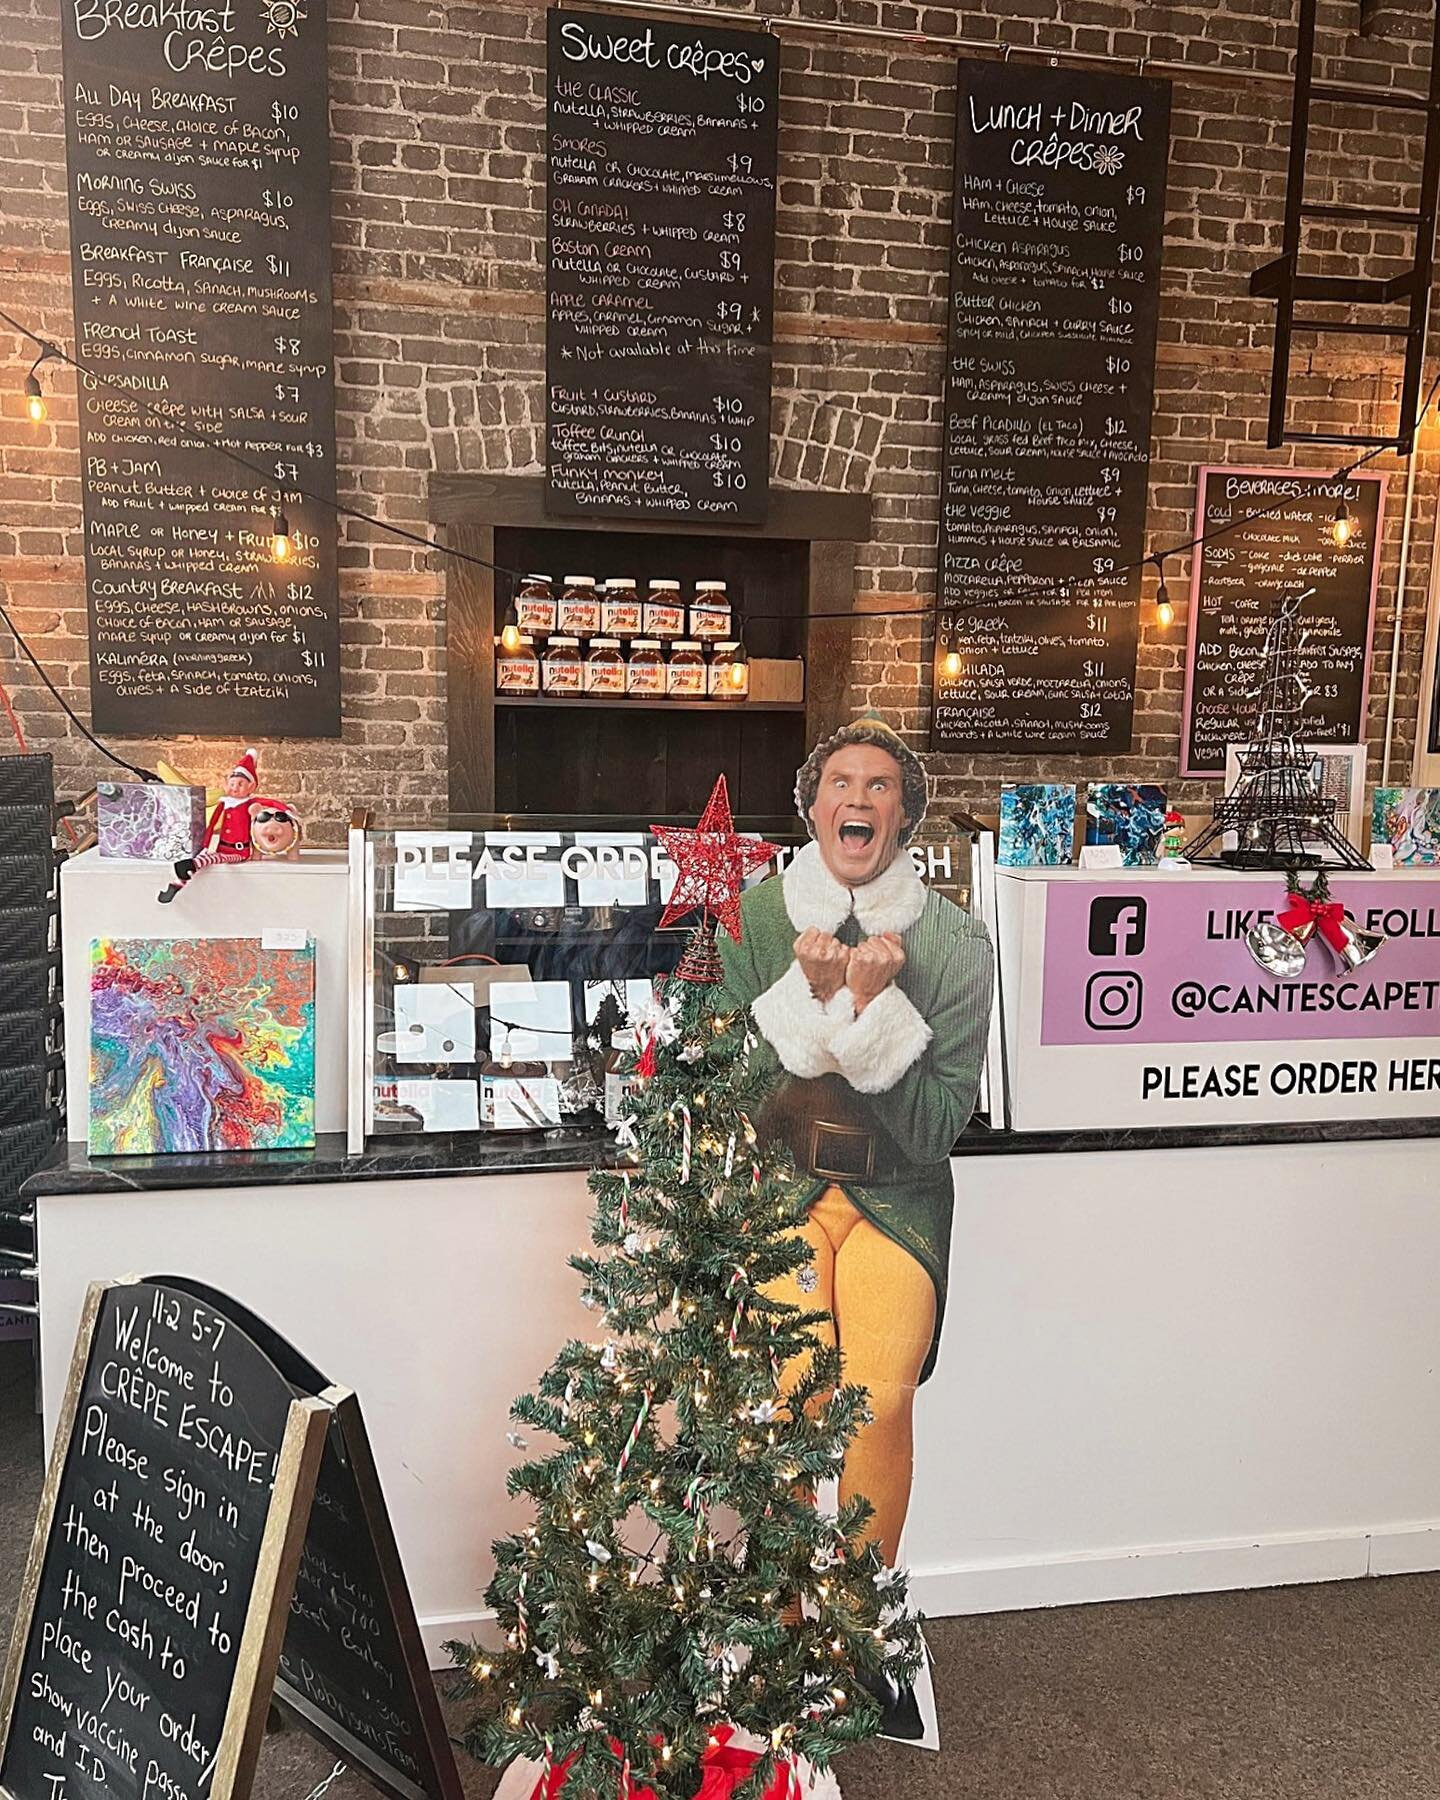 Great news everyone 😄

Cr&ecirc;pe Escape will be opening for dinners starting this Saturday, December 2! 

Our new hours (starting Saturday) are as follows:
WED to FRI 11AM to 2PM - 5PM to 7PM
SAT to SUN 9AM to 2PM - 5PM to 7PM

Buddy the Elf can&r